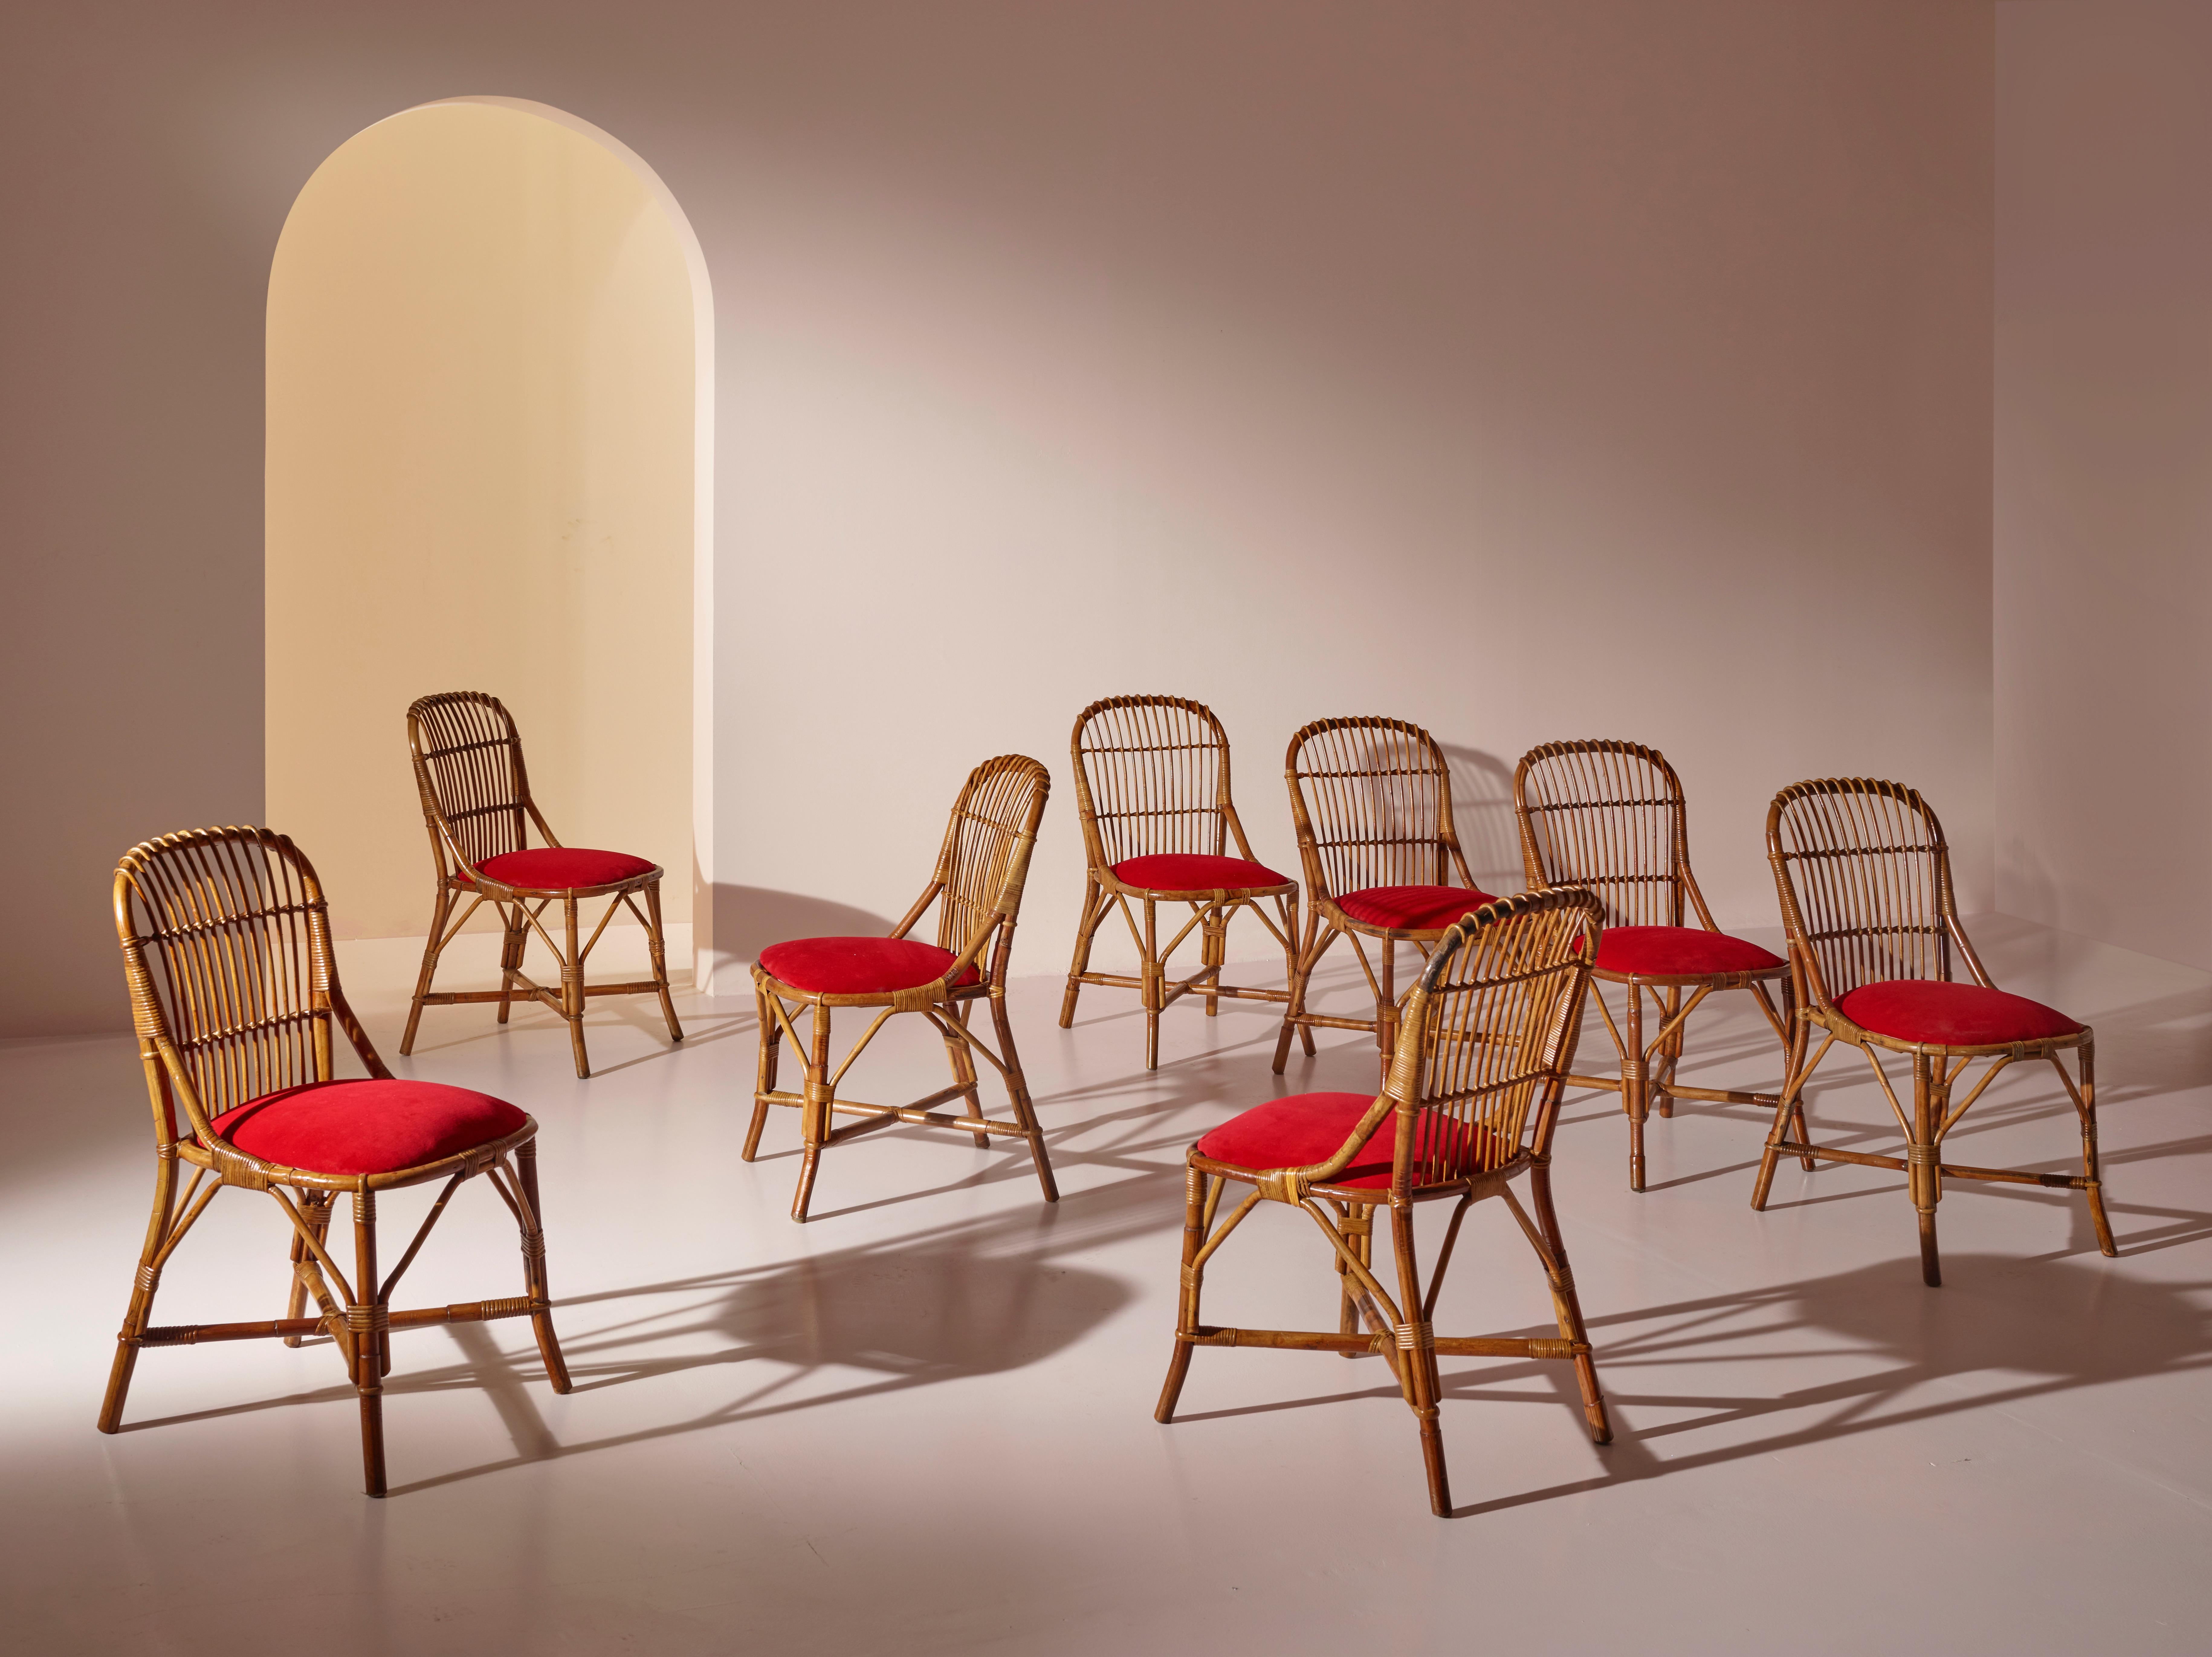 This set of eight dining chairs, designed by Tito Agnoli and produced by Vittorio Bonacina in the 1960s, is a beautiful example of Italian design of the period. The chairs are made from bamboo reinforced with cane, which lends them both strength and